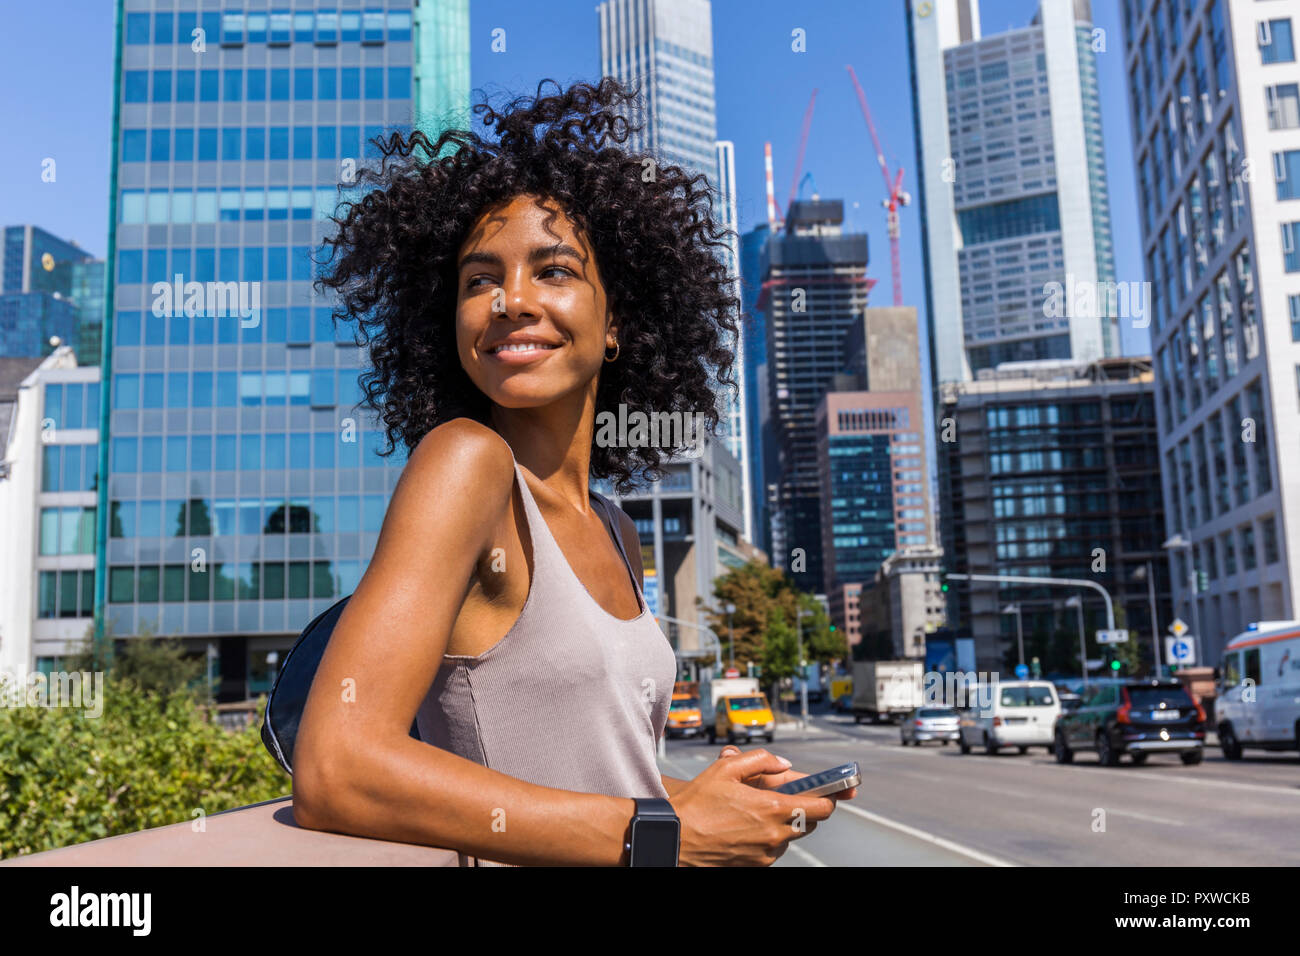 Germany, Frankfurt, portrait of smiling young woman with curly hair in the city Stock Photo